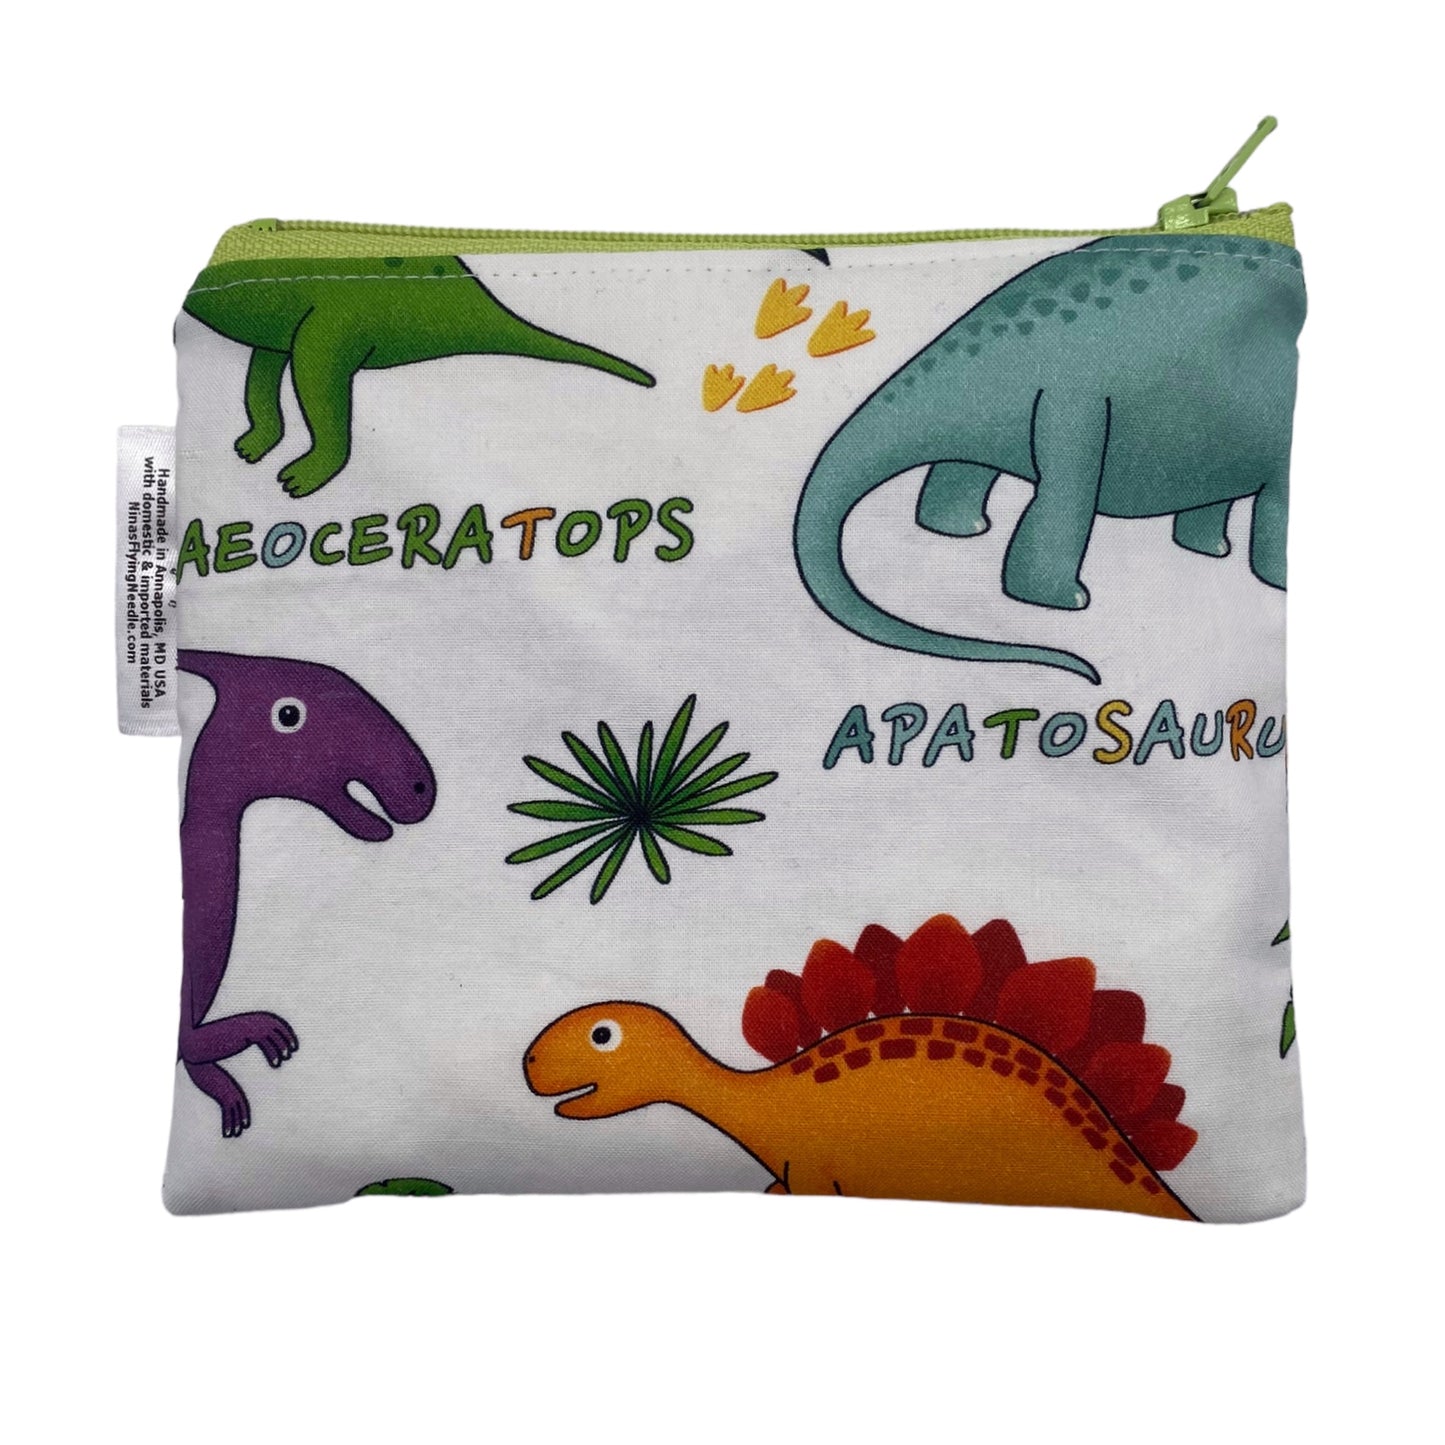 Toddler Sized Reusable Zippered Bag Dinosaurs with Names